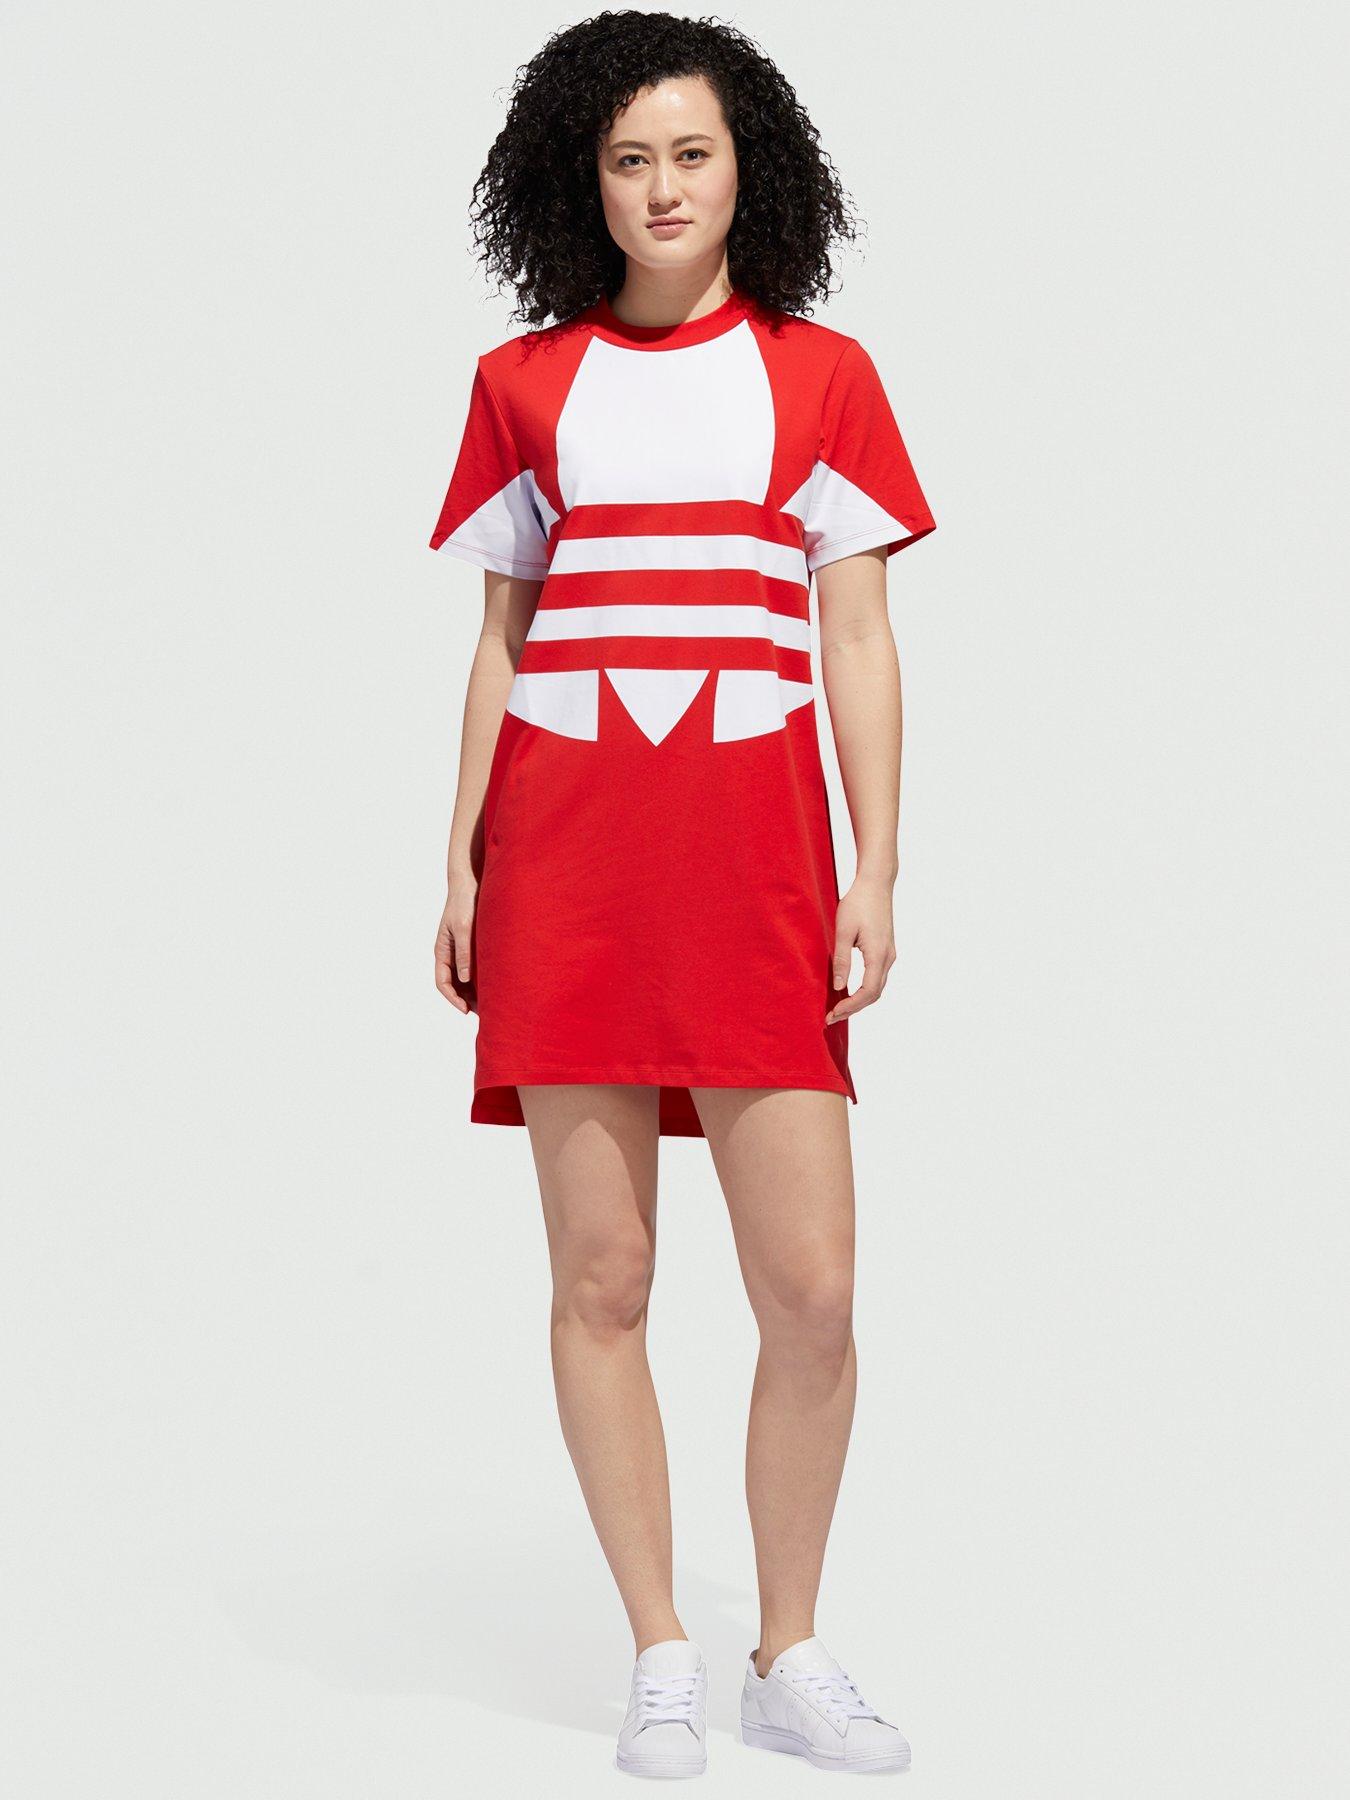 red and grey adidas dress